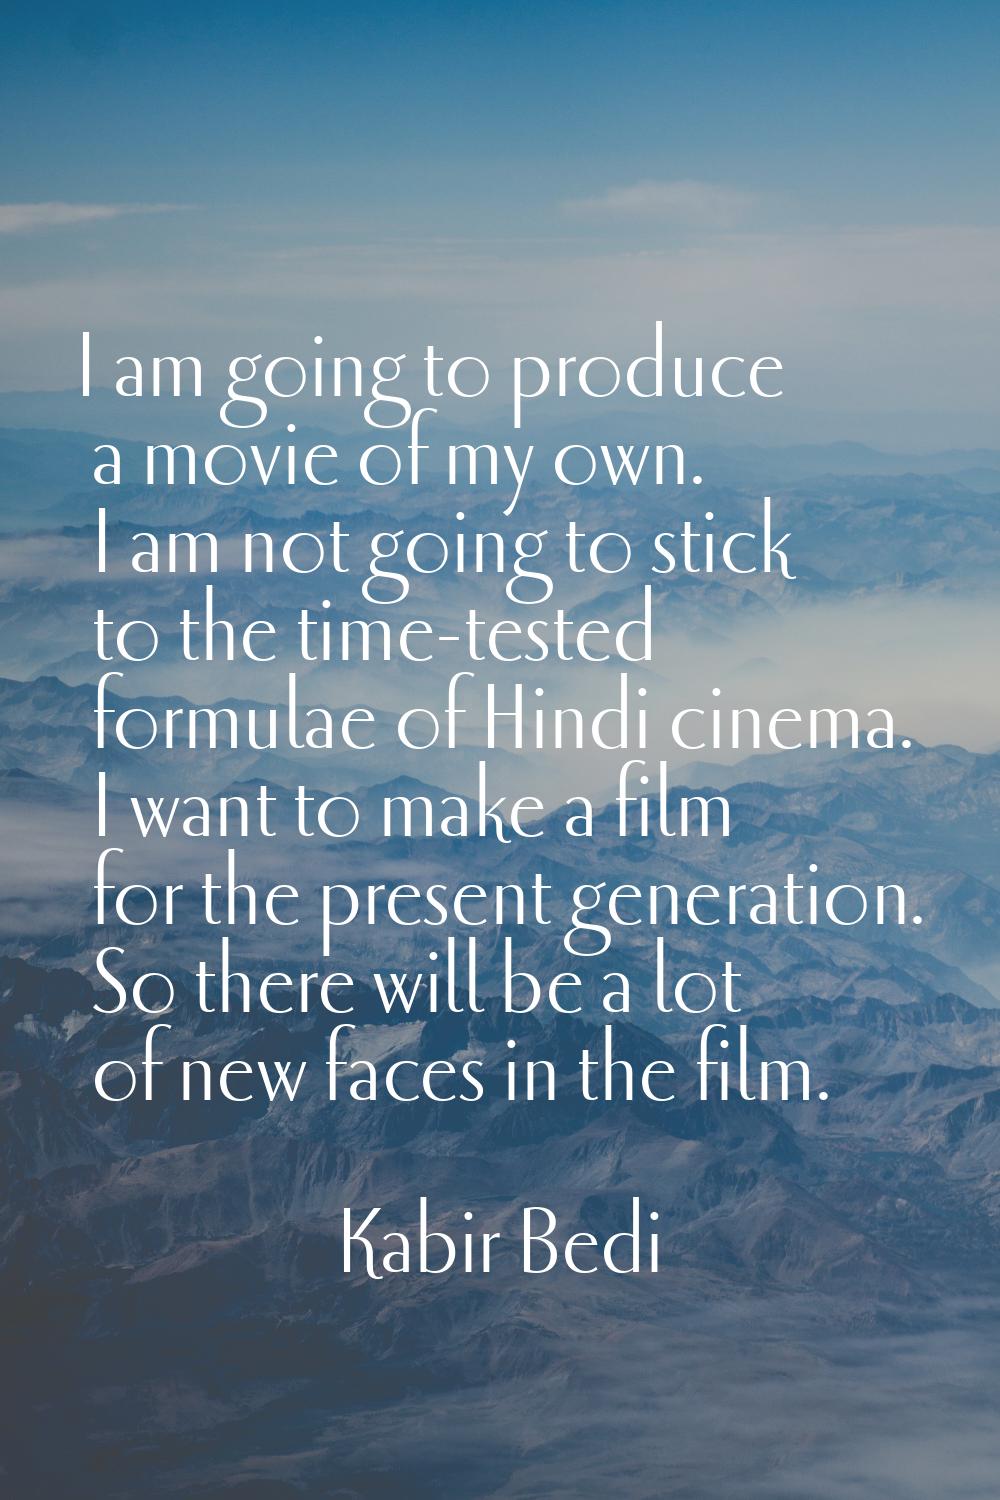 I am going to produce a movie of my own. I am not going to stick to the time-tested formulae of Hin